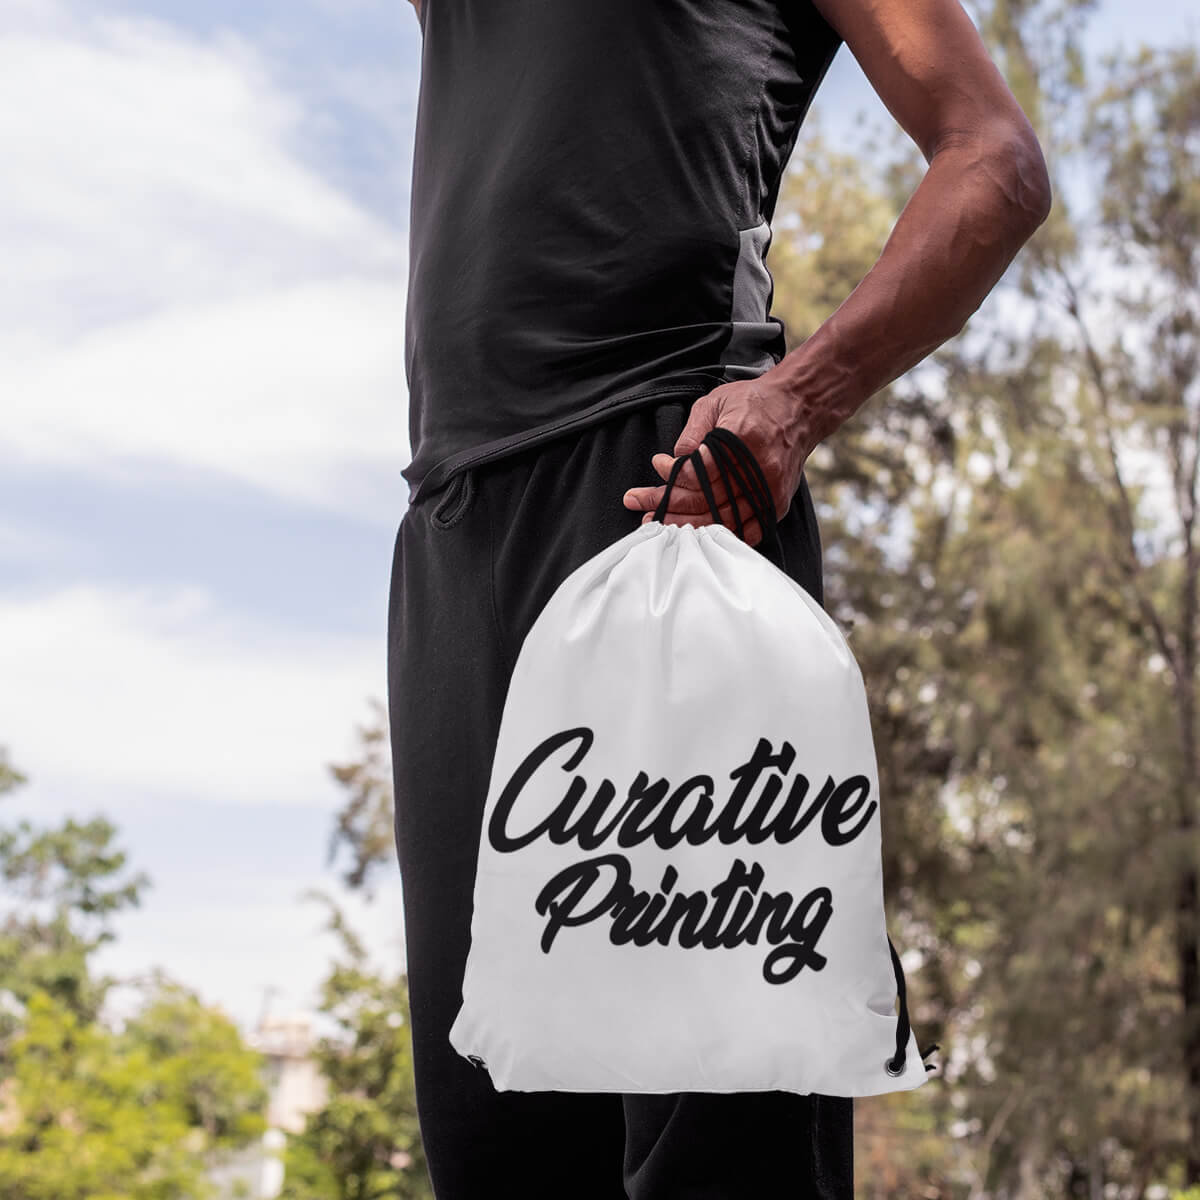 Man holding white custom promotional drawstring bags by curative printing